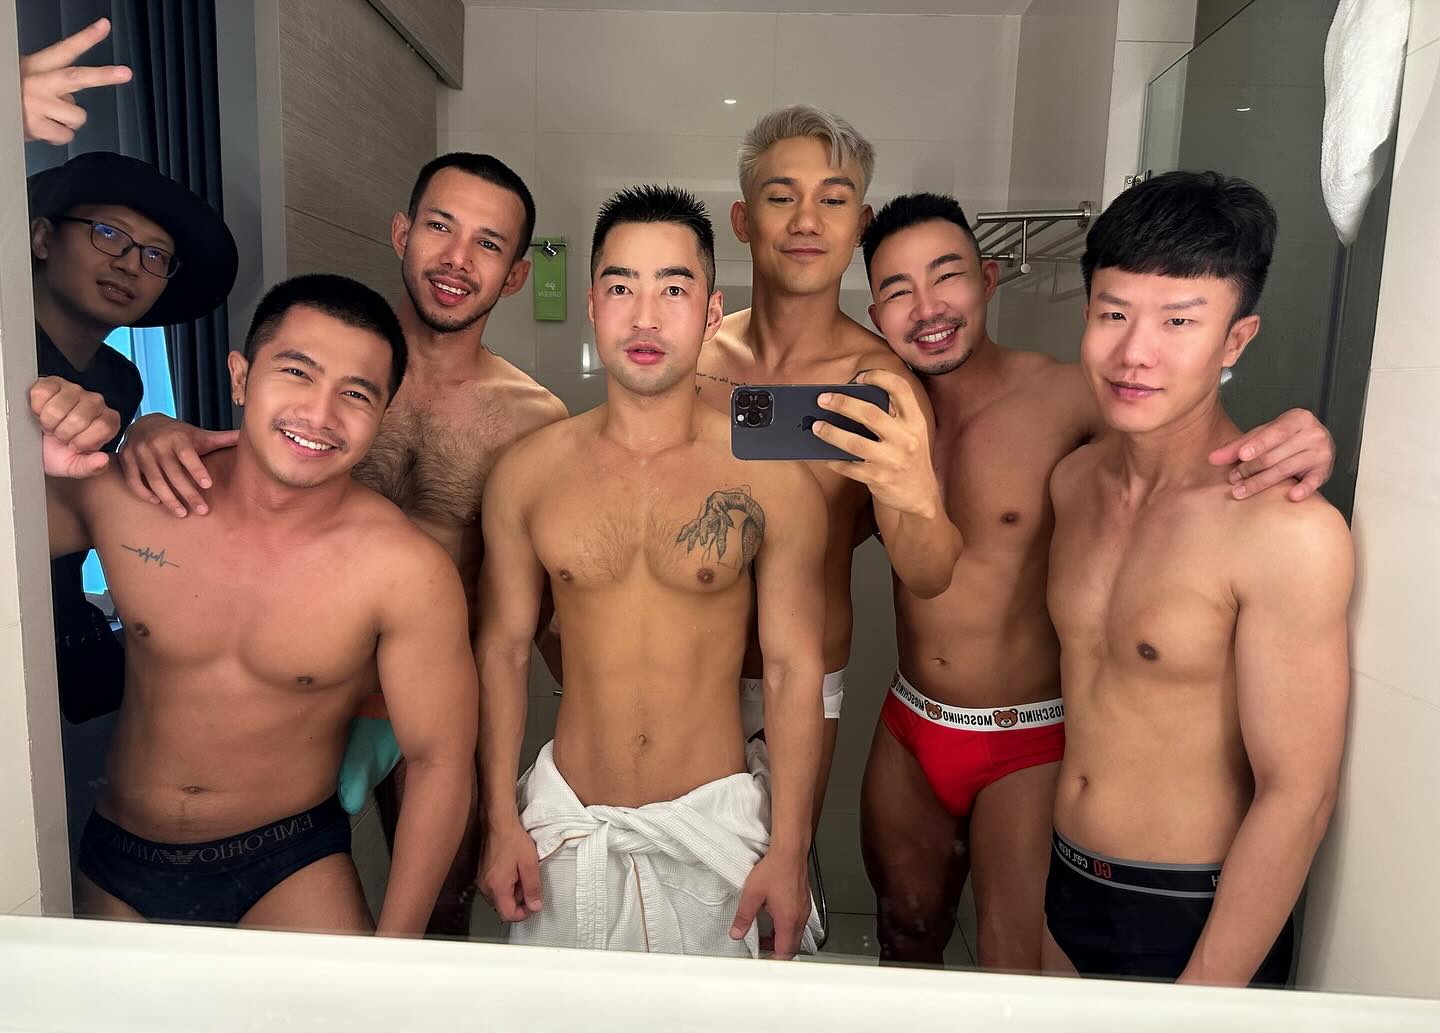 The category is truly asian boys ! 🫣